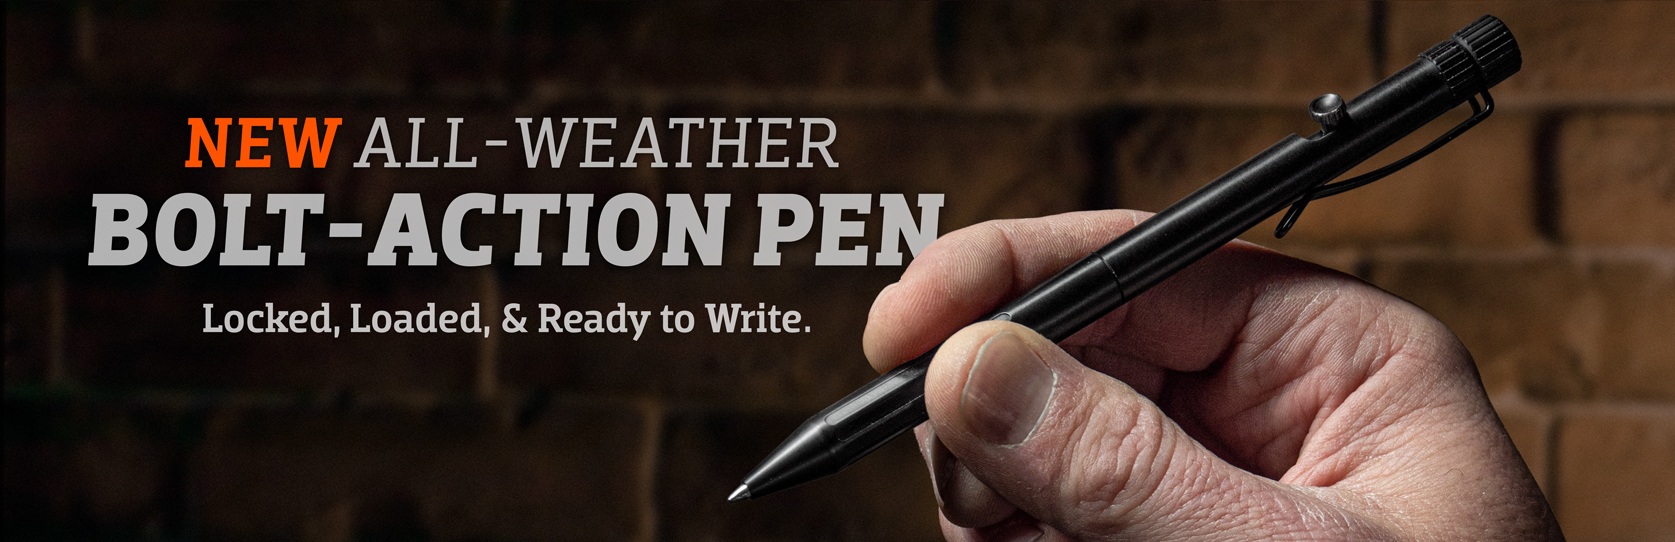 New All-Weather Bolt-Action Pen. No matter your work space, this pen is 
Locked, Loaded, & Ready to Write.